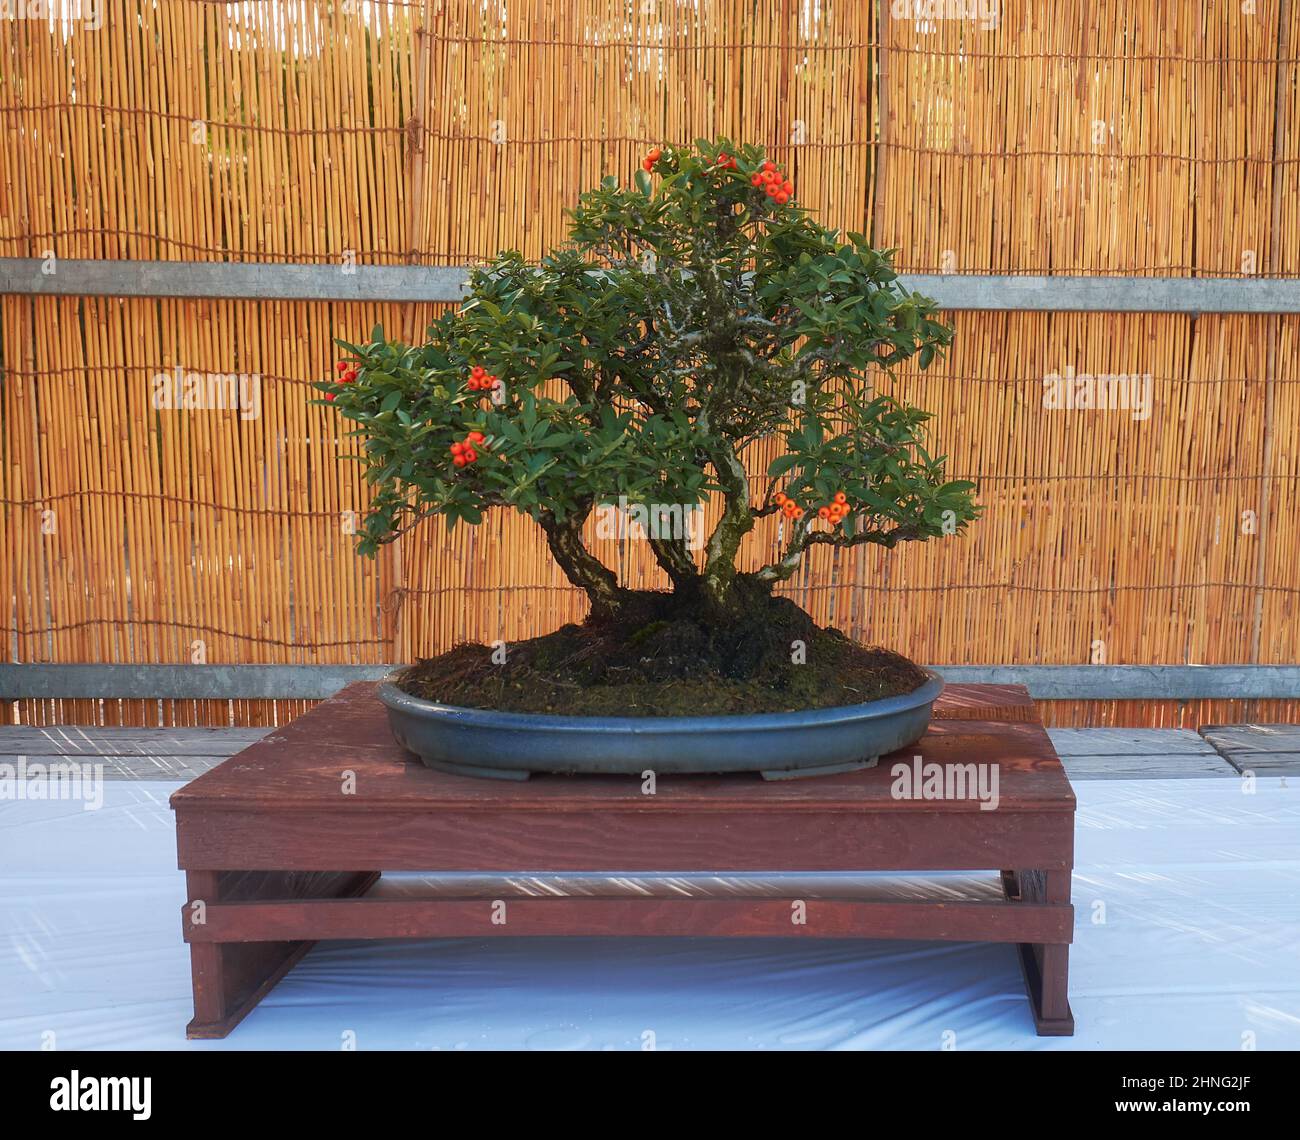 Nagoya, Japan - October 20, 2019: The view of the decorative bonsai tree of firethorn (Pyracantha) with berries at the annual Nagoya Castle Bonsai Sho Stock Photo